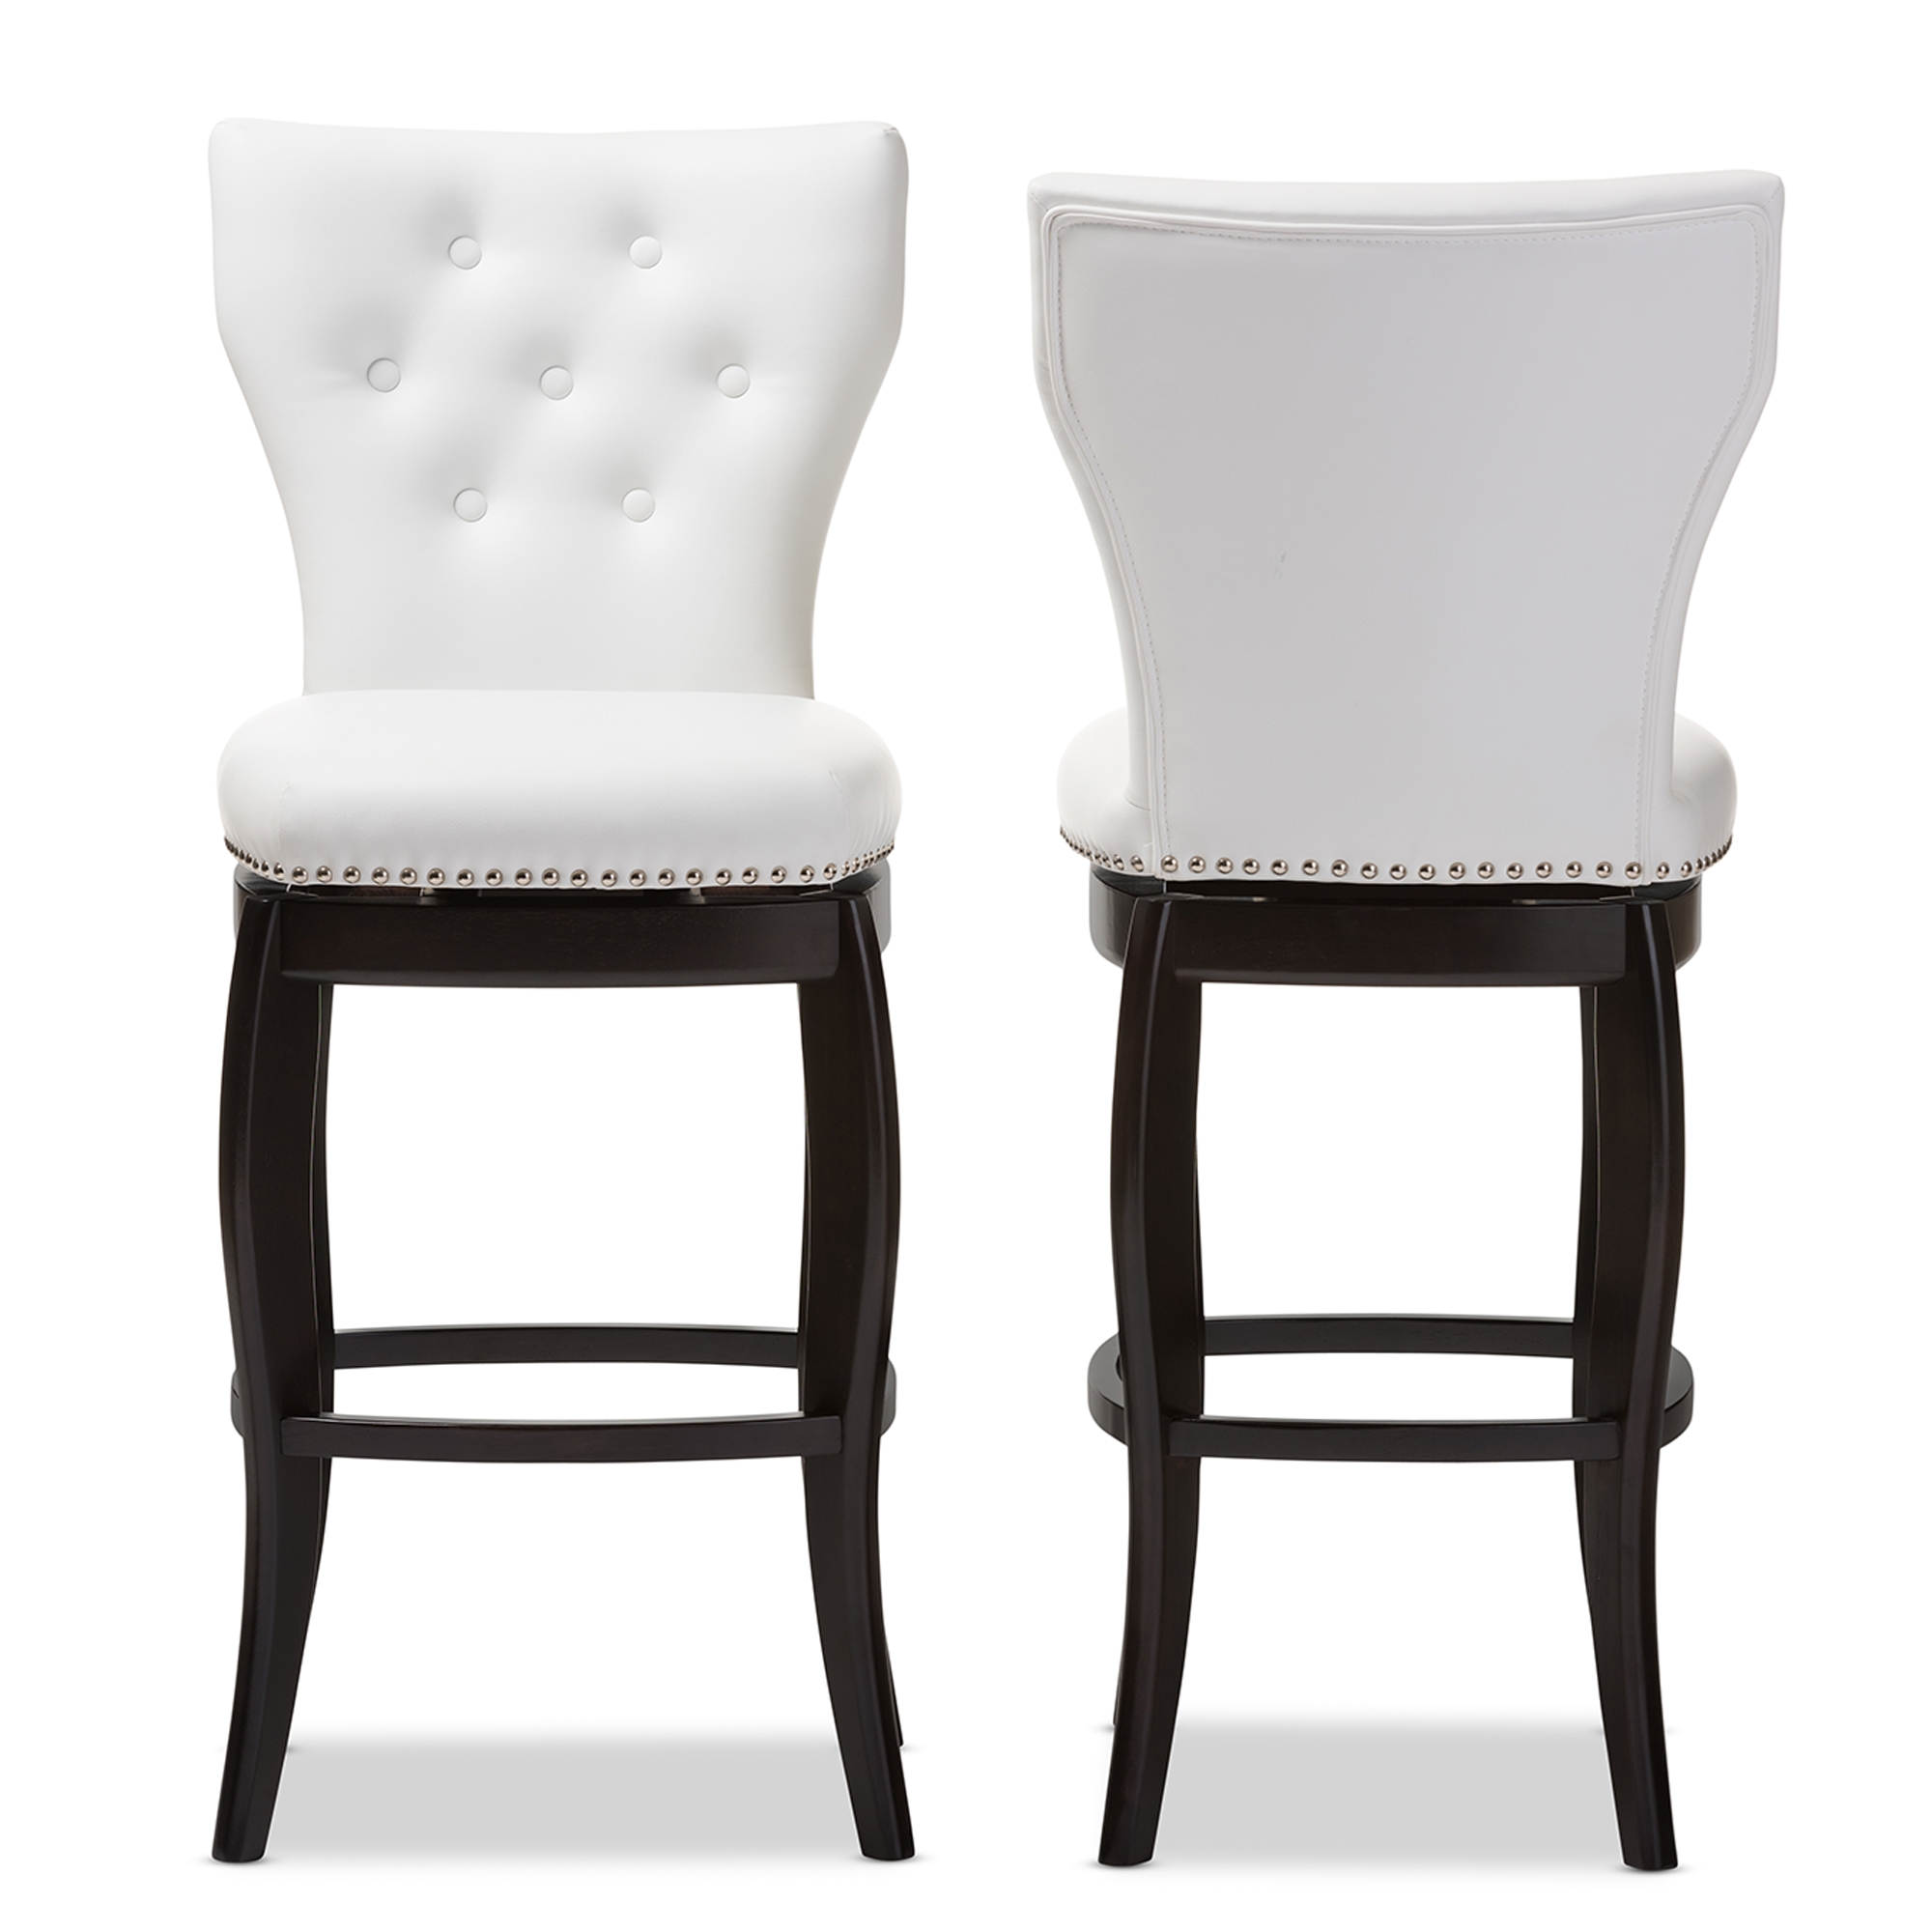 Baxton Studio Leonice Modern and Contemporary White Faux Leather Upholstered Button-tufted 29-Inch Swivel Bar Stool